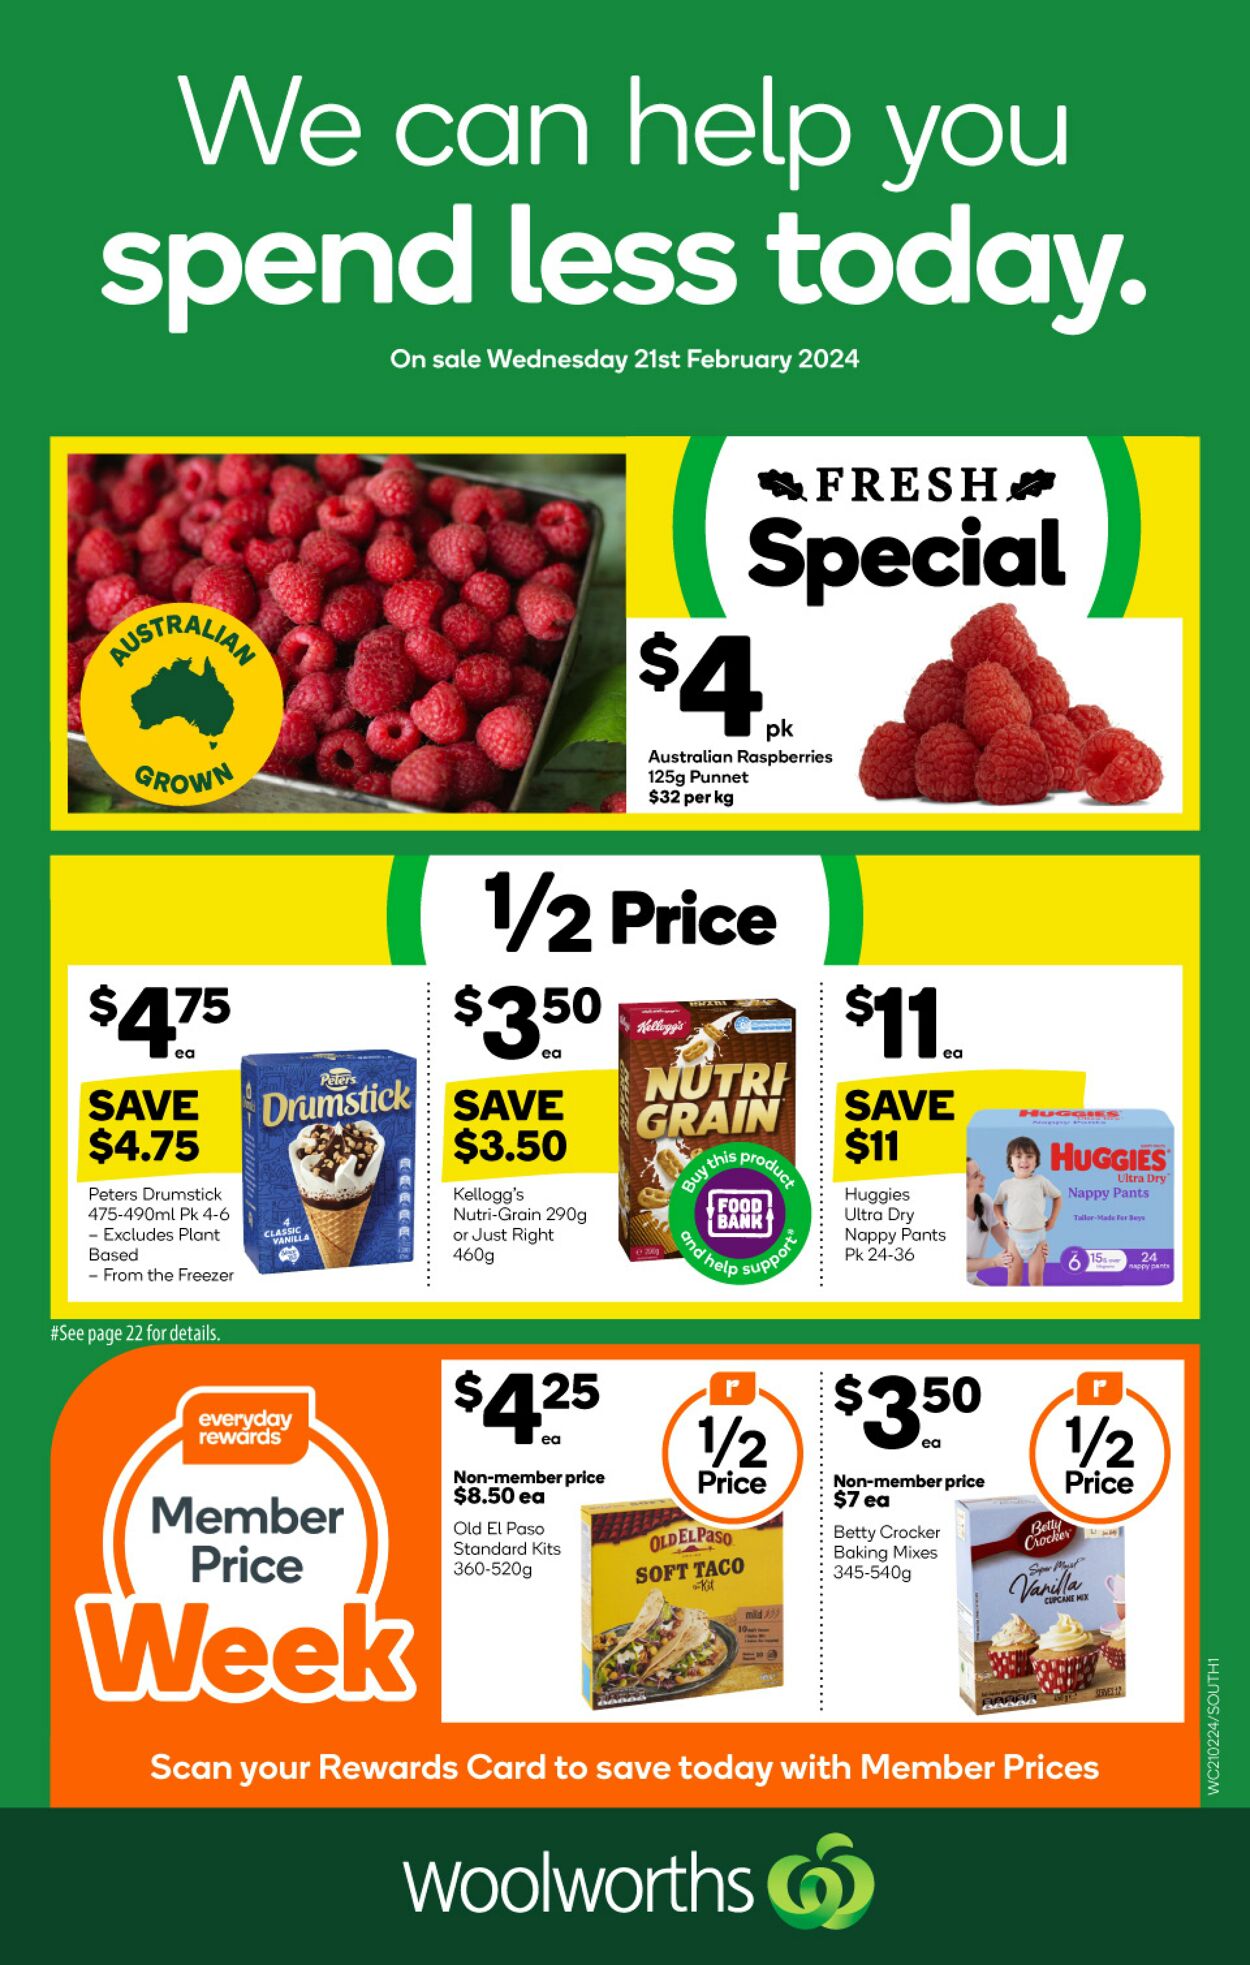 Catalogue Woolworths - Weekly Specials Catalogue NSW South 21 Feb, 2024 - 27 Feb, 2024